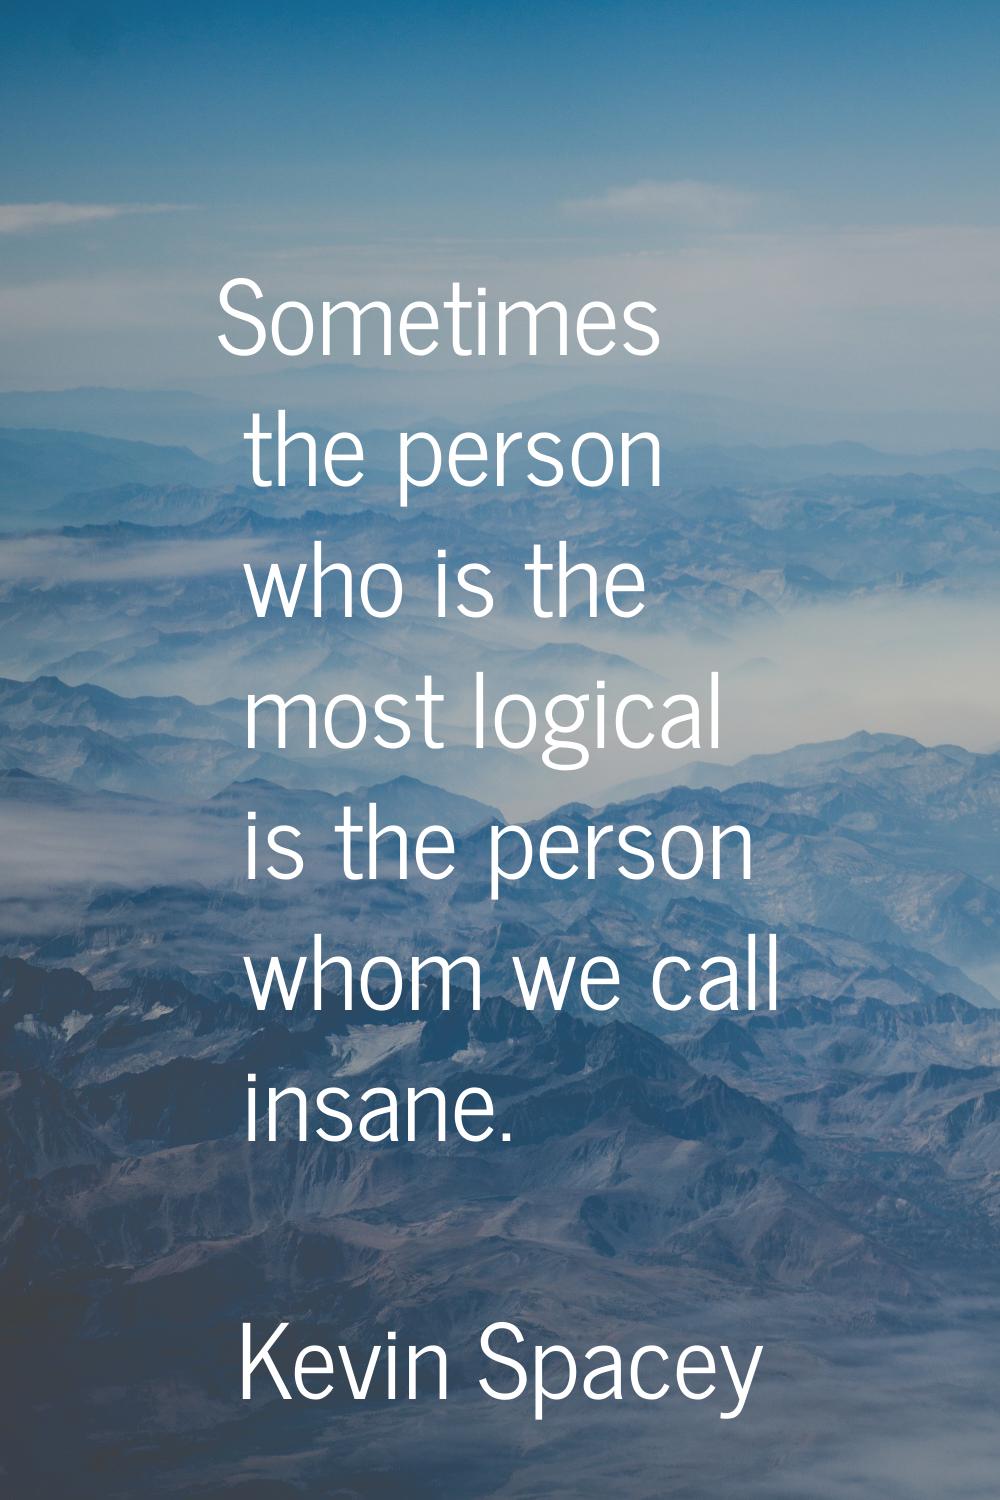 Sometimes the person who is the most logical is the person whom we call insane.